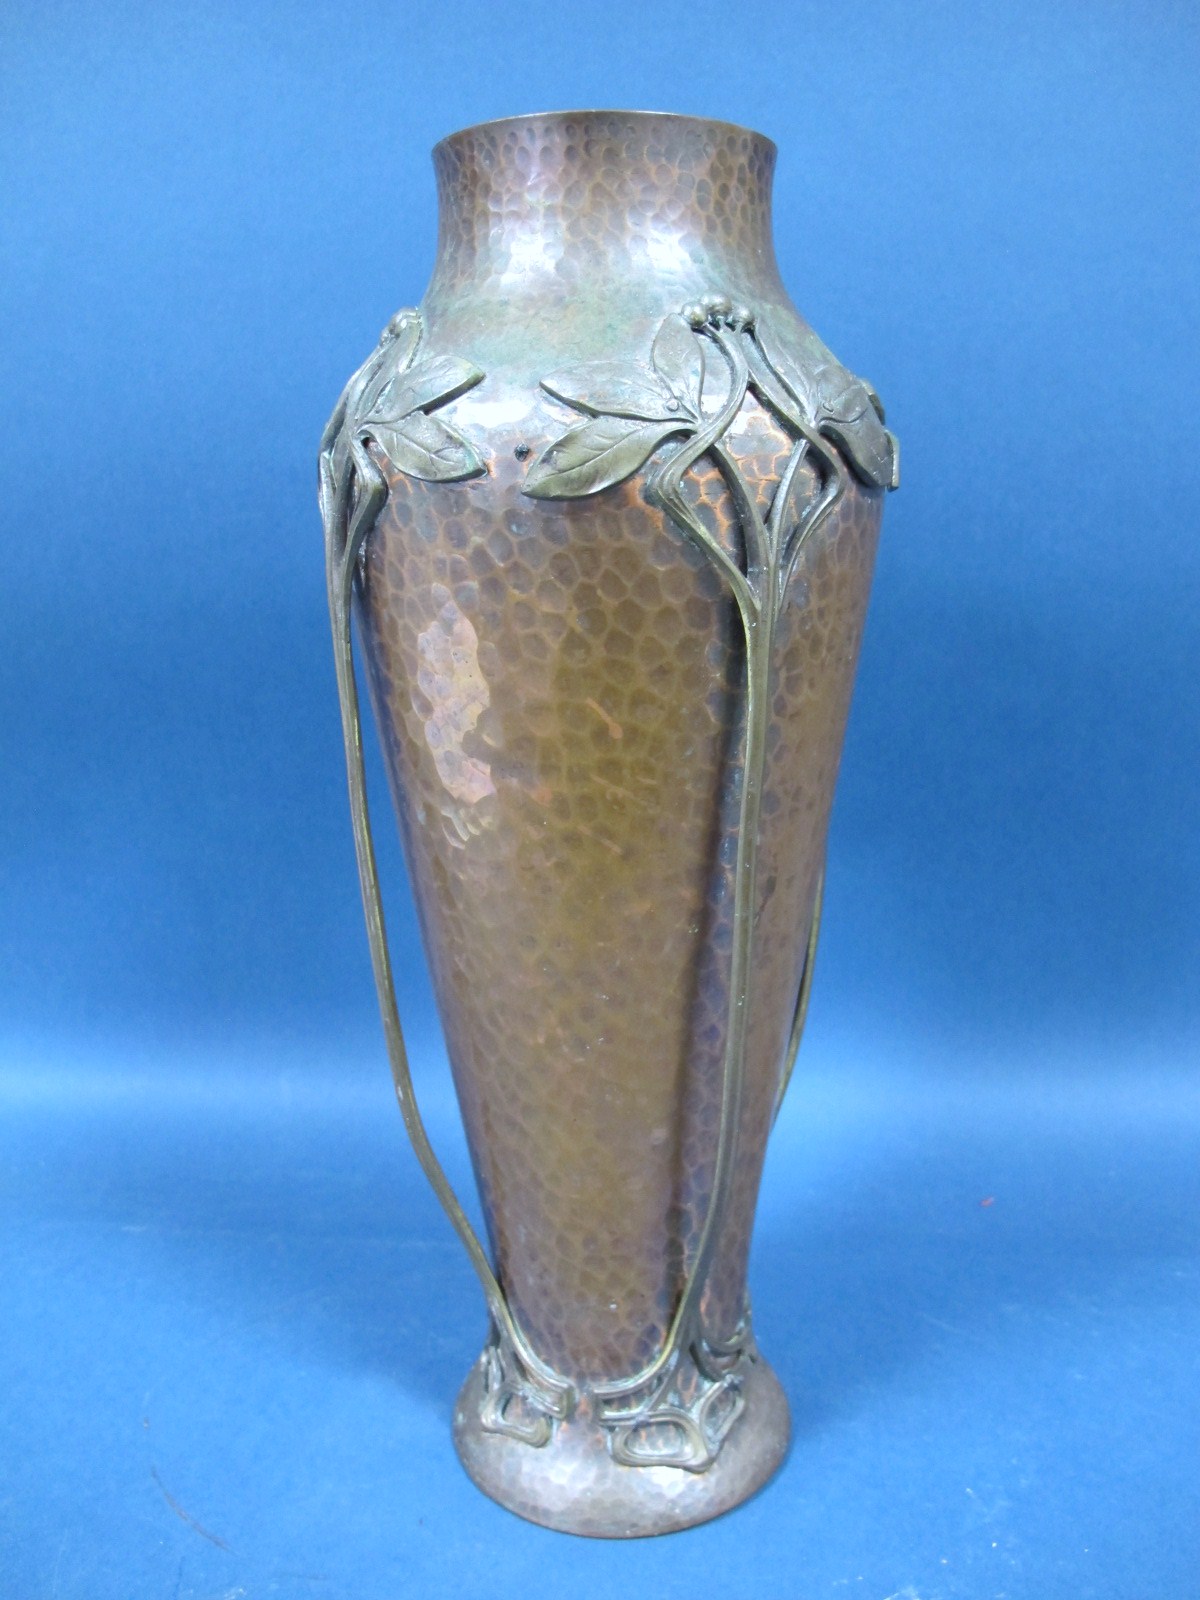 An Early XX Century W.M.F. Planished Copper Baluster Vase, decorated with applied plant tendrils